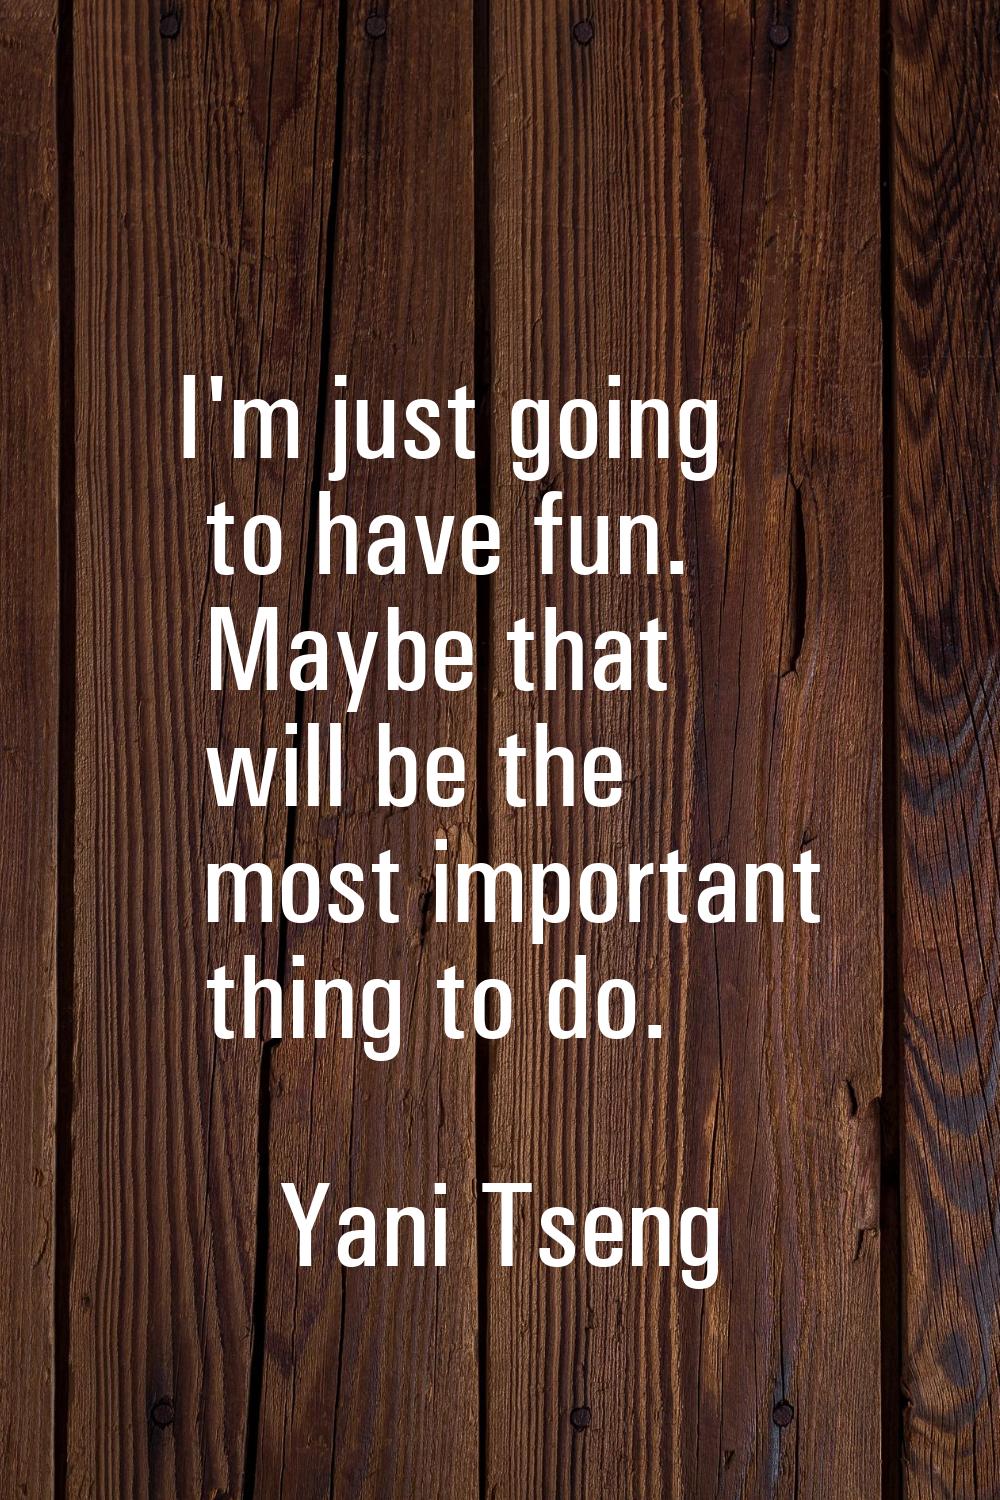 I'm just going to have fun. Maybe that will be the most important thing to do.